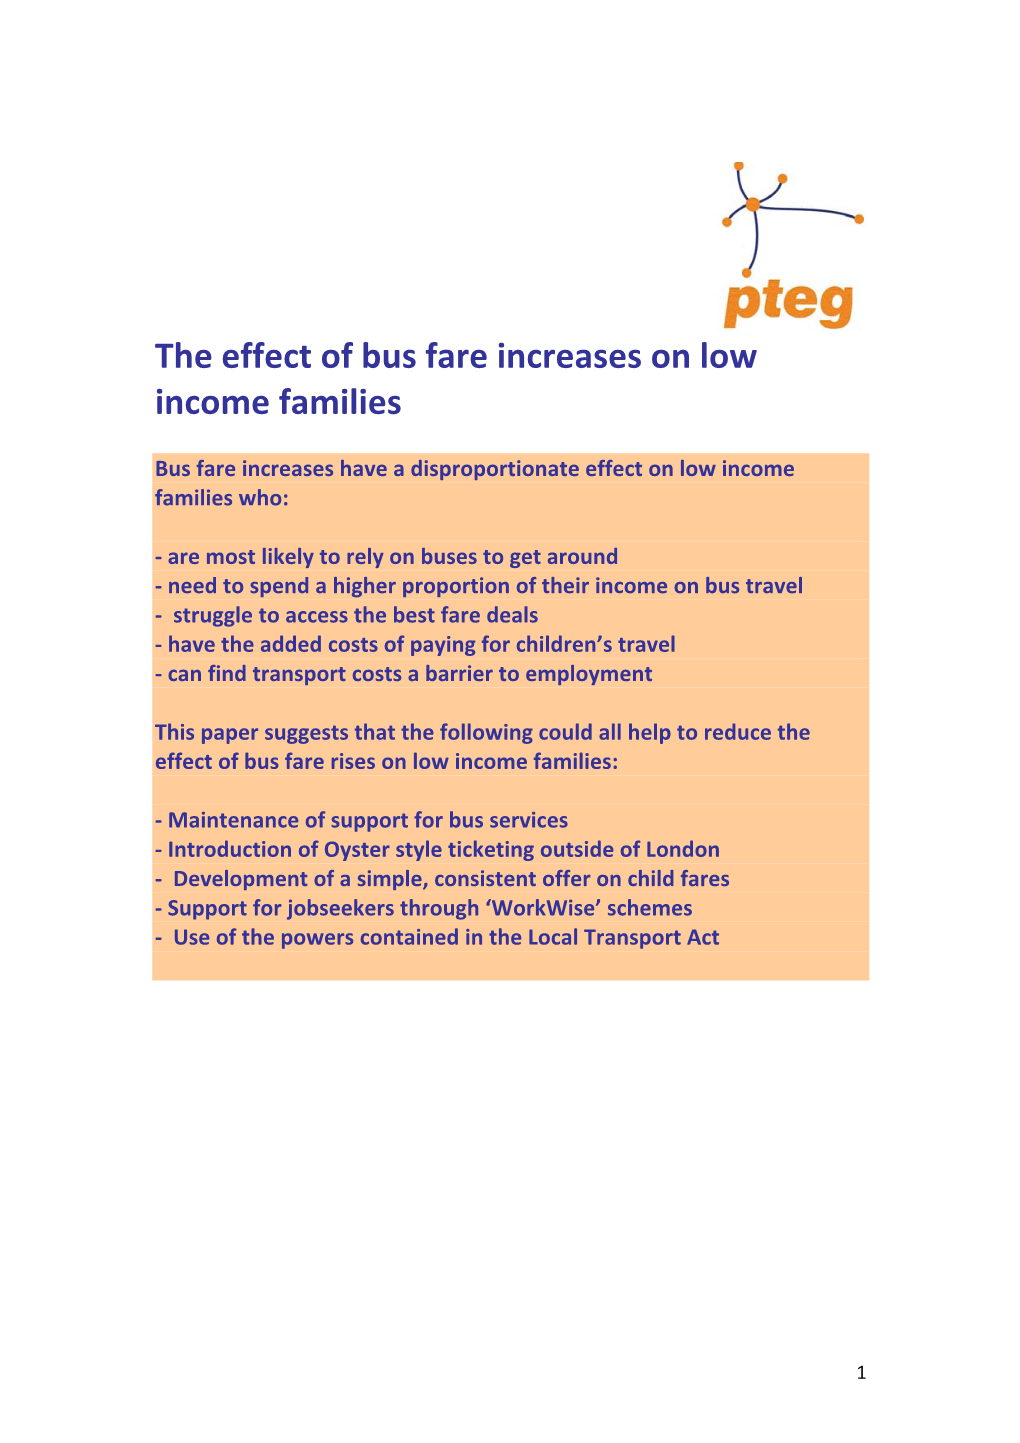 The Effect of Bus Fare Increases on Low Income Families